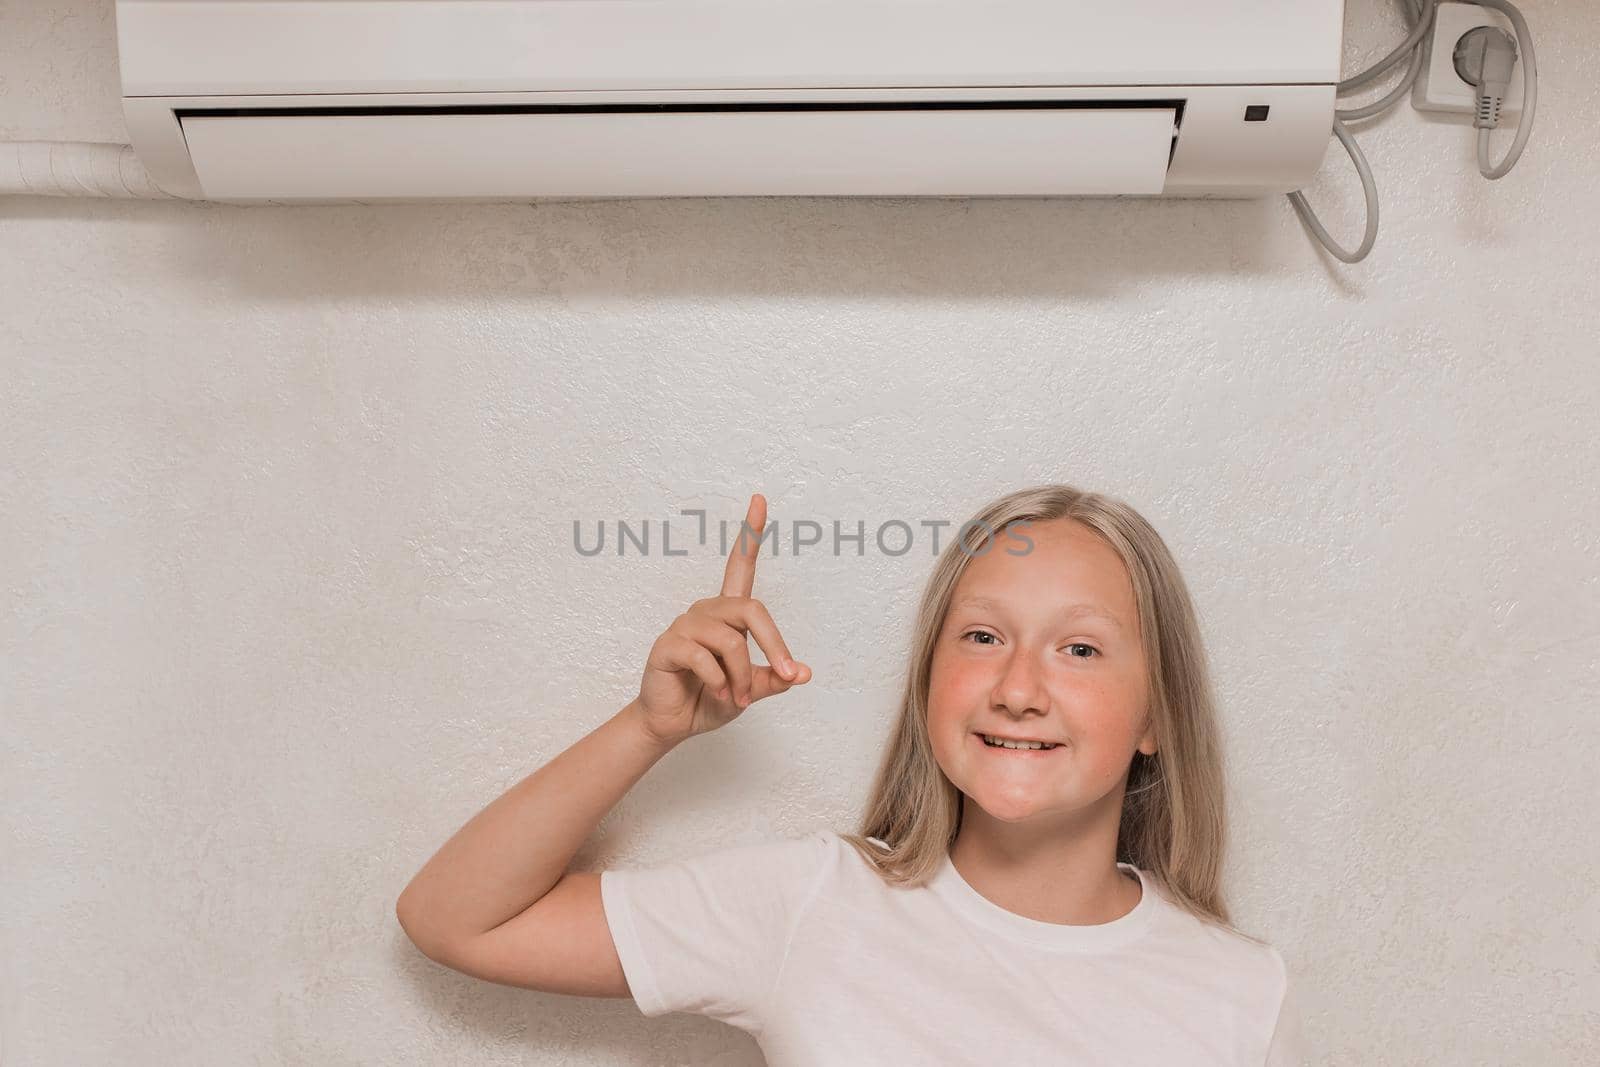 Cute teenage girl blonde European appearance points a hand finger at the air conditioner on the wall in the room.